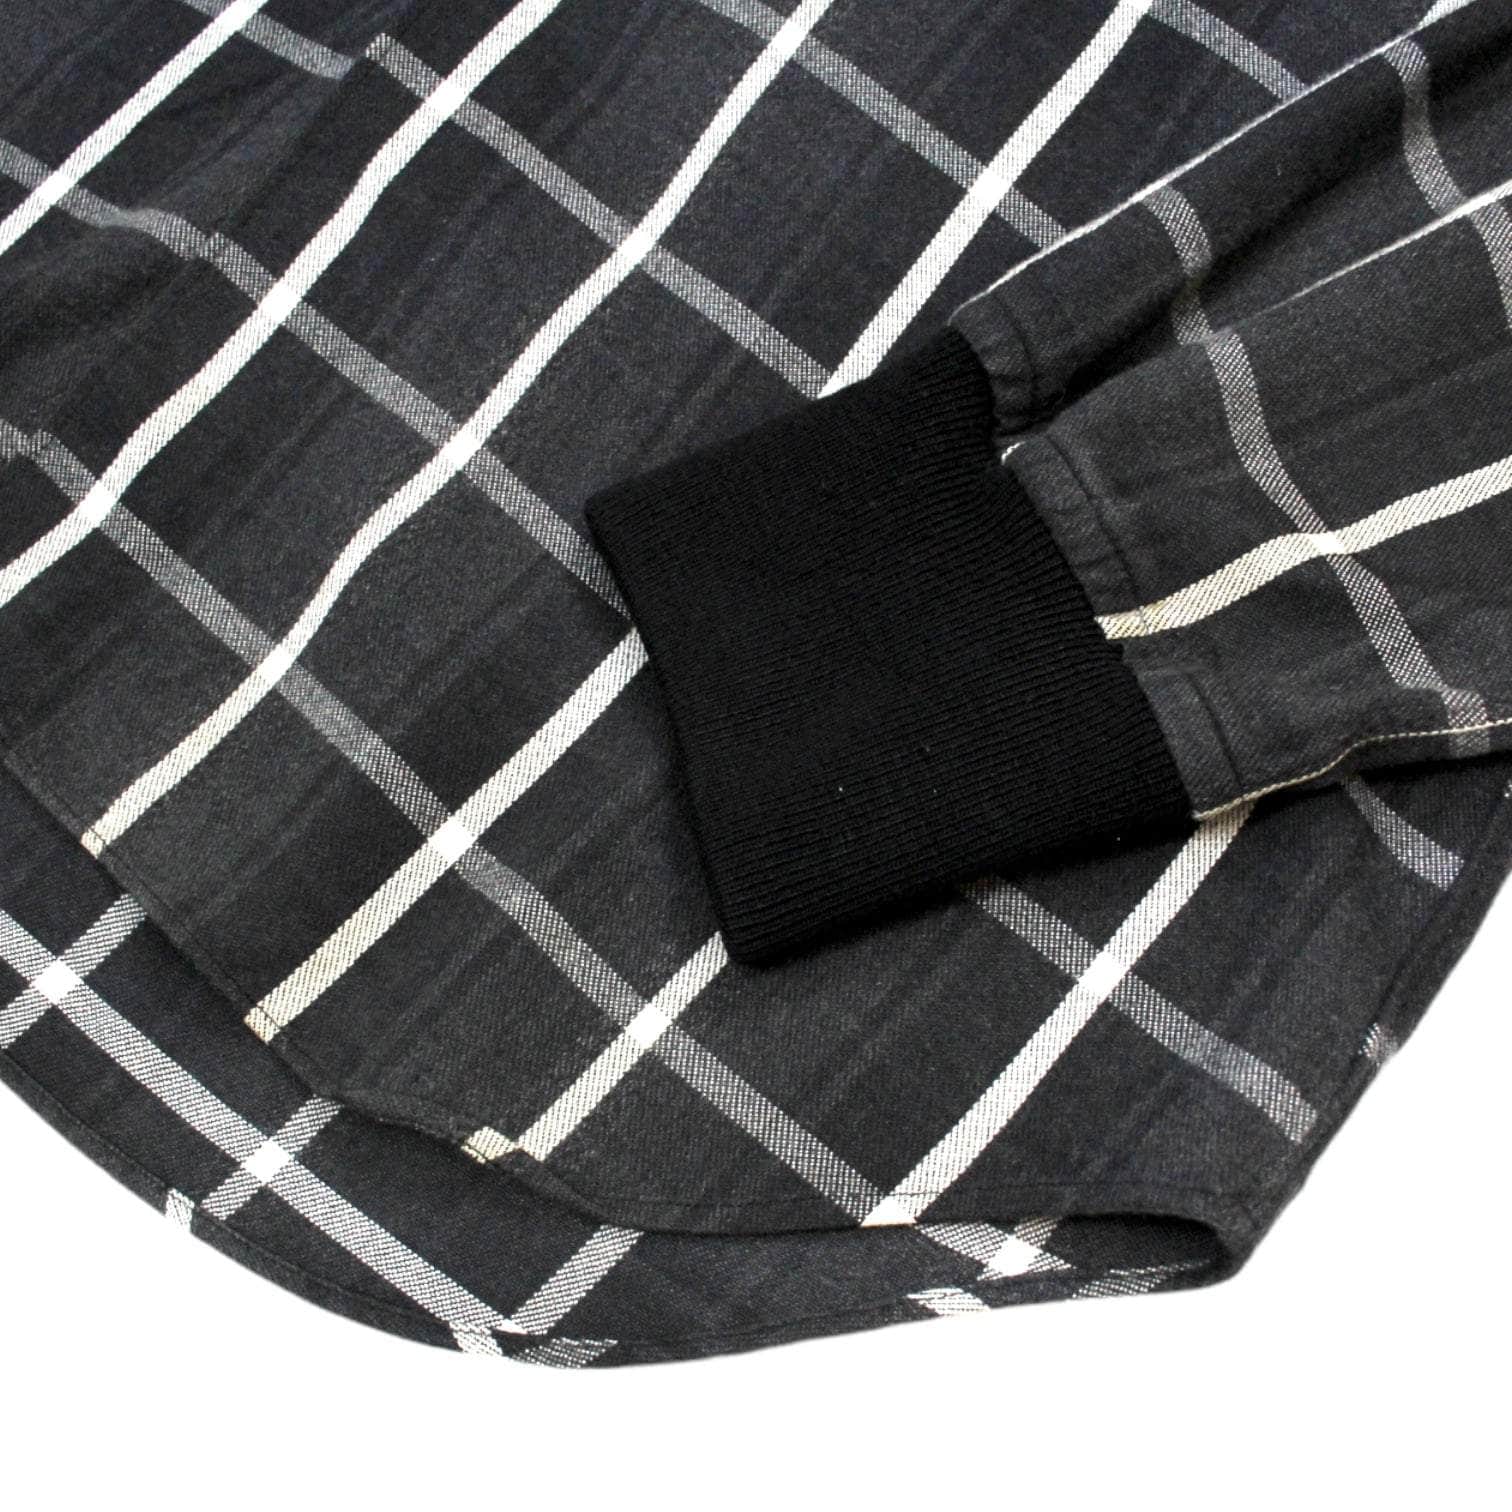 Comme des Garcons Grey Check Ribbed Cuff Shirt